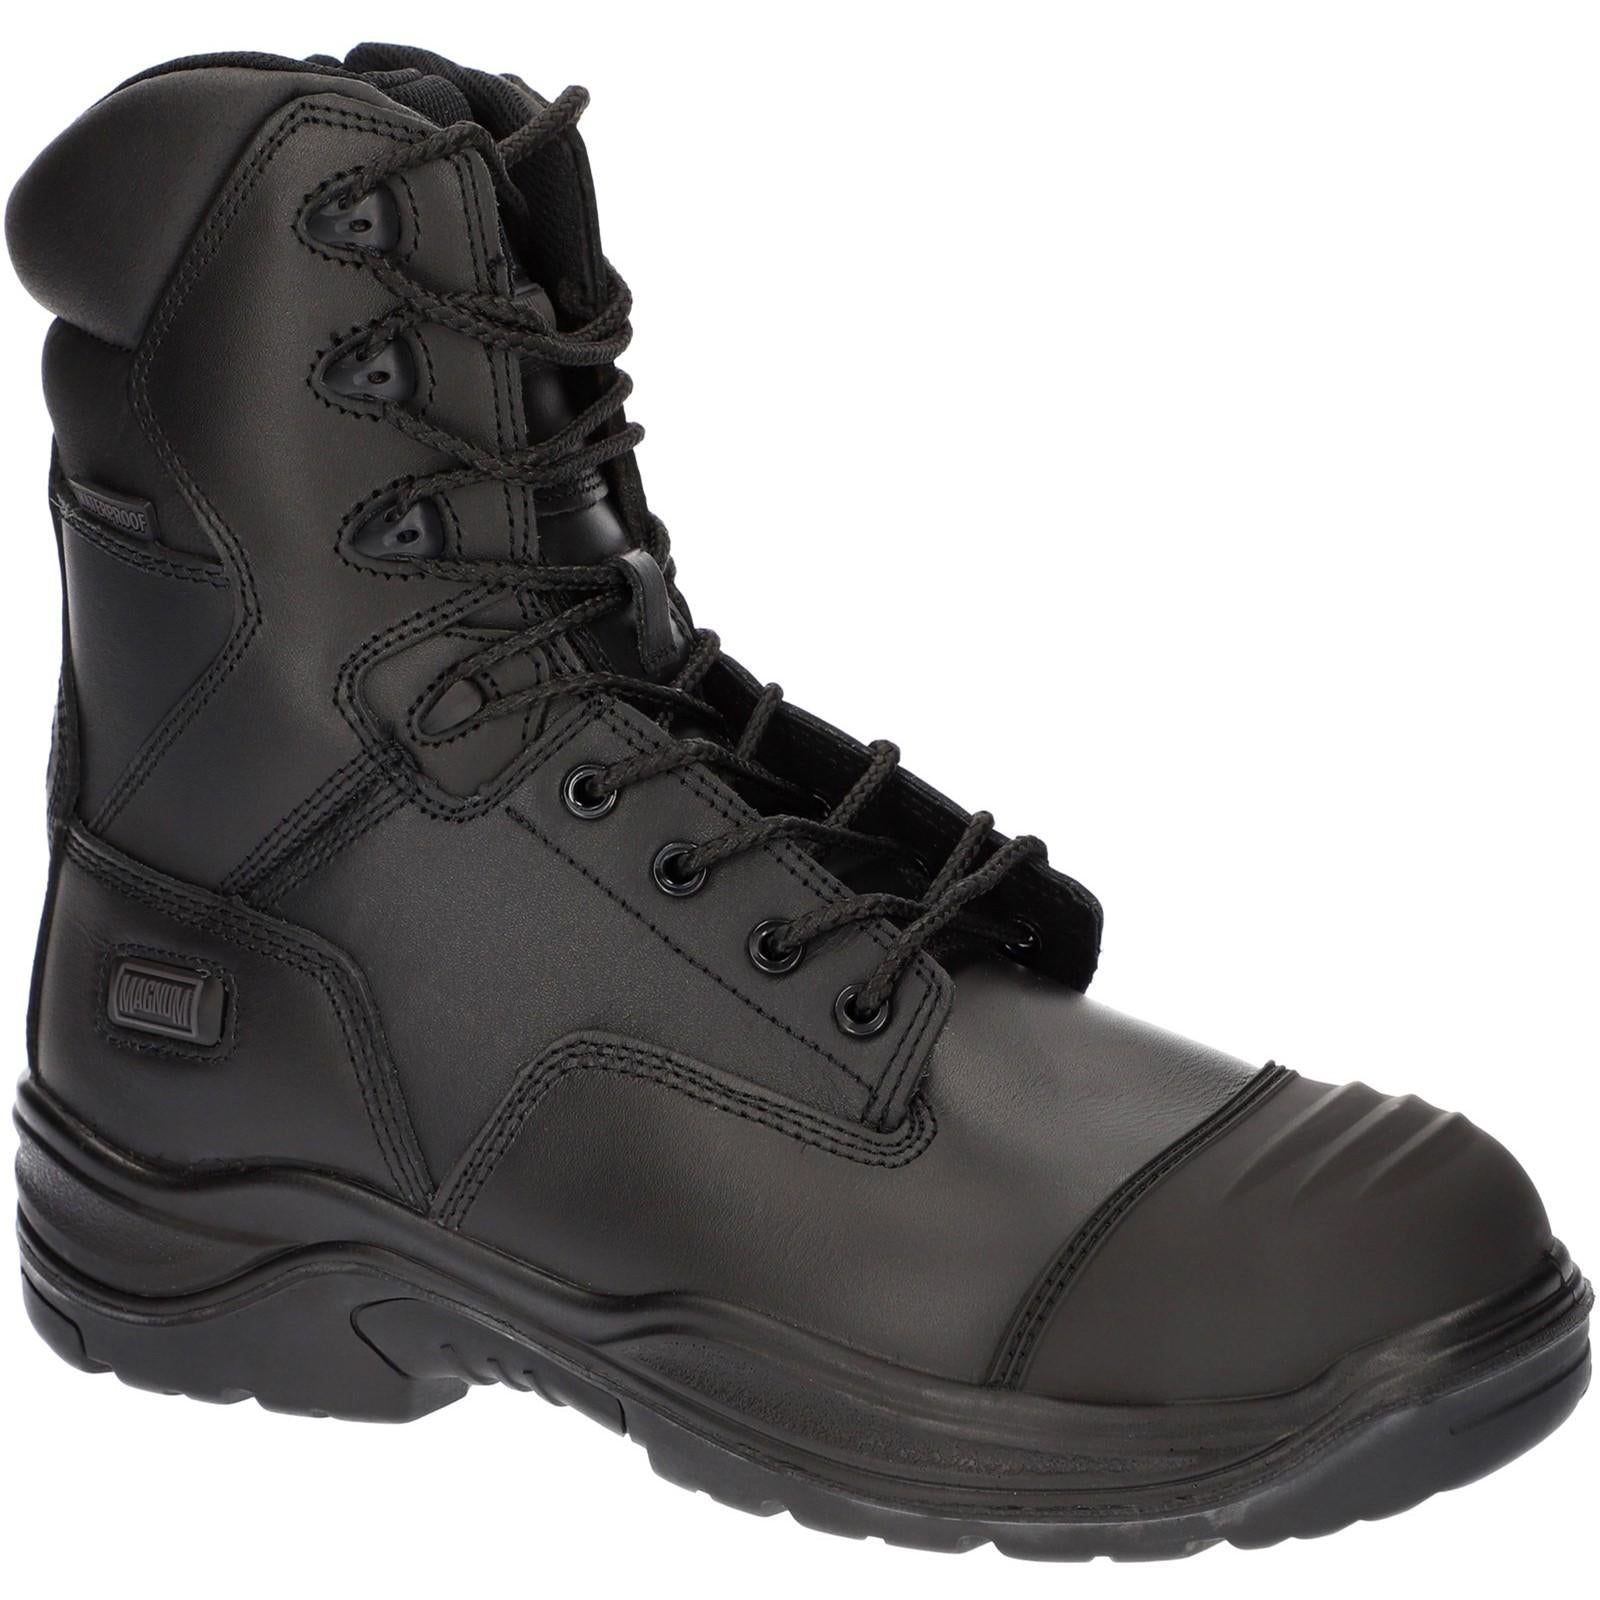 Magnum Rigmaster 8.0 Side-Zip CT CP WP Uniform Safety Boot